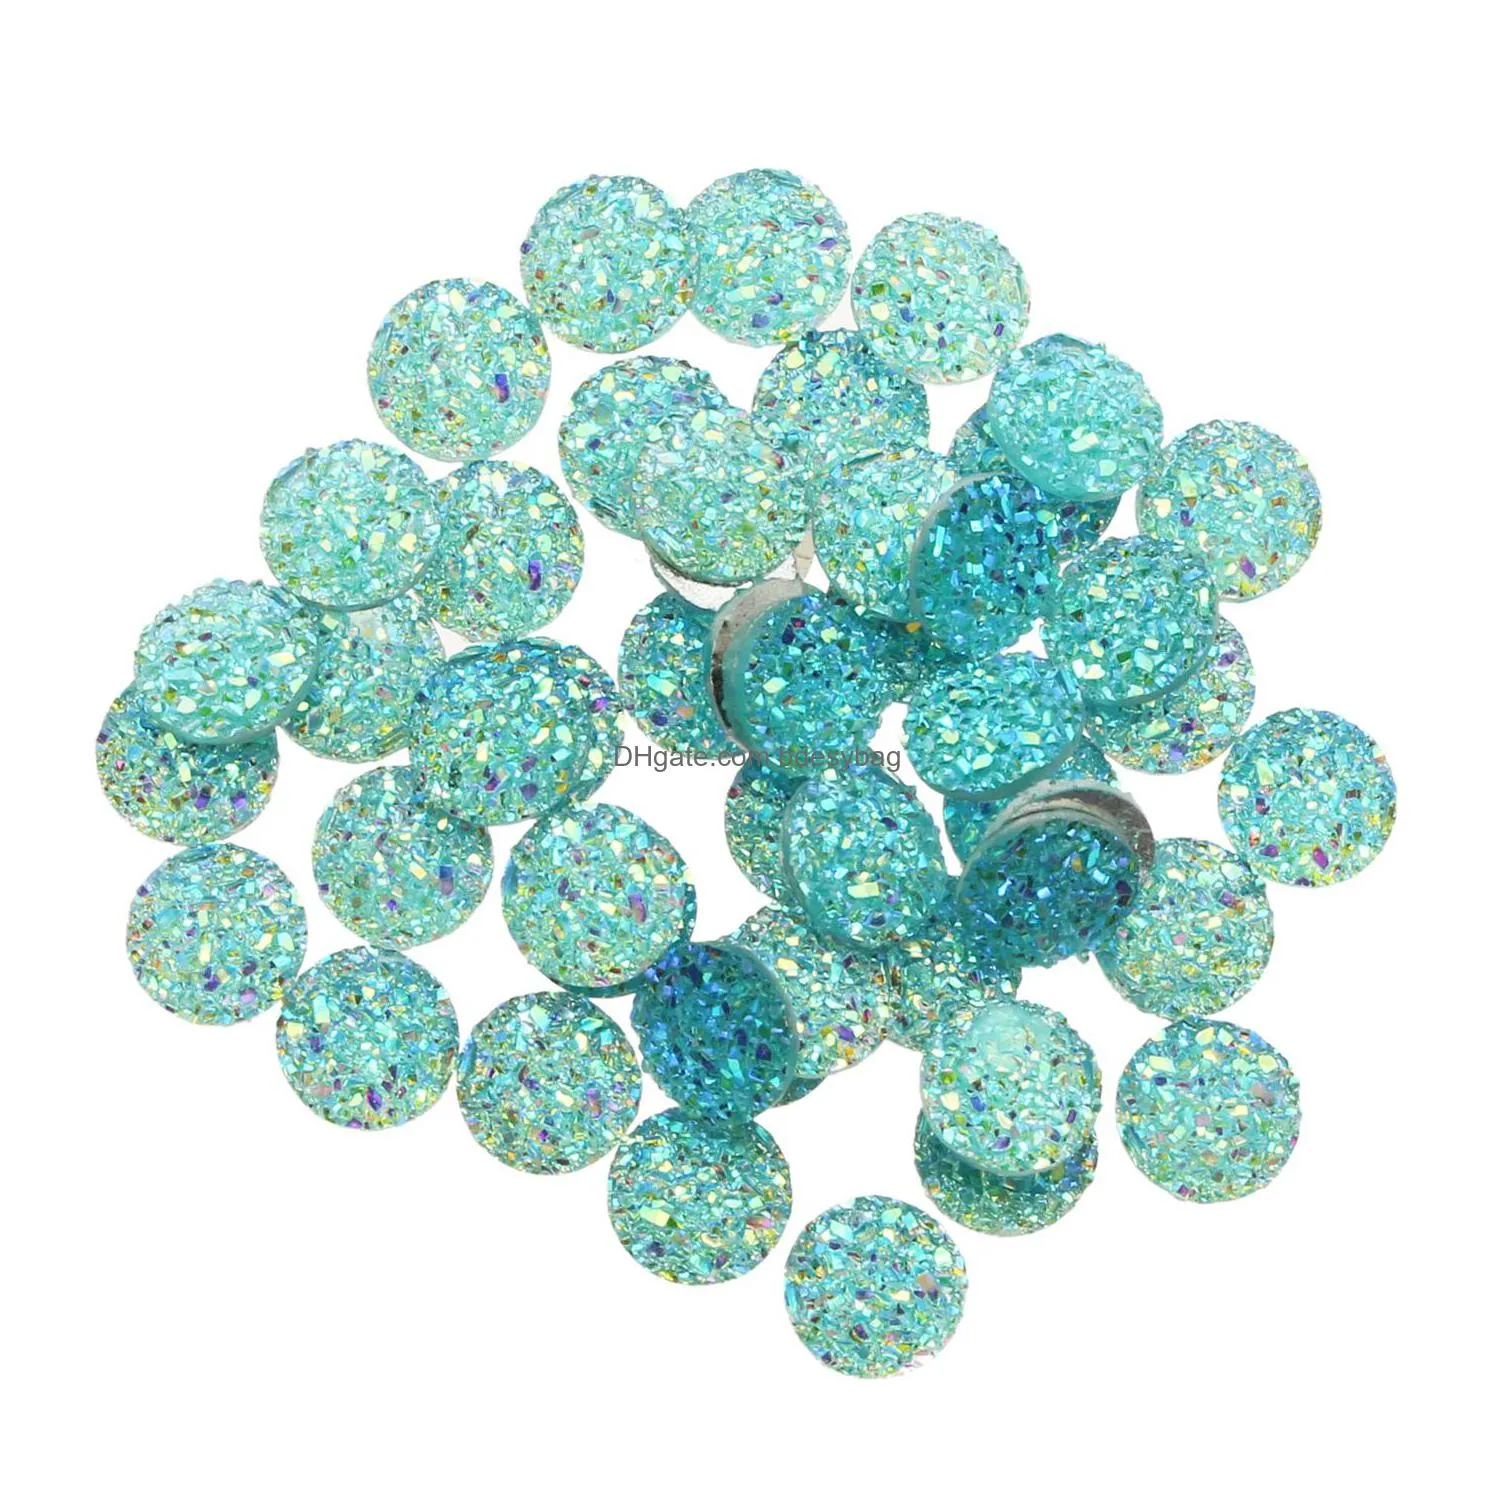 1000pcs 10mm flatback resin druzy round cabochons cameo for charms pendant bracelet jewelry diy making accessory findings